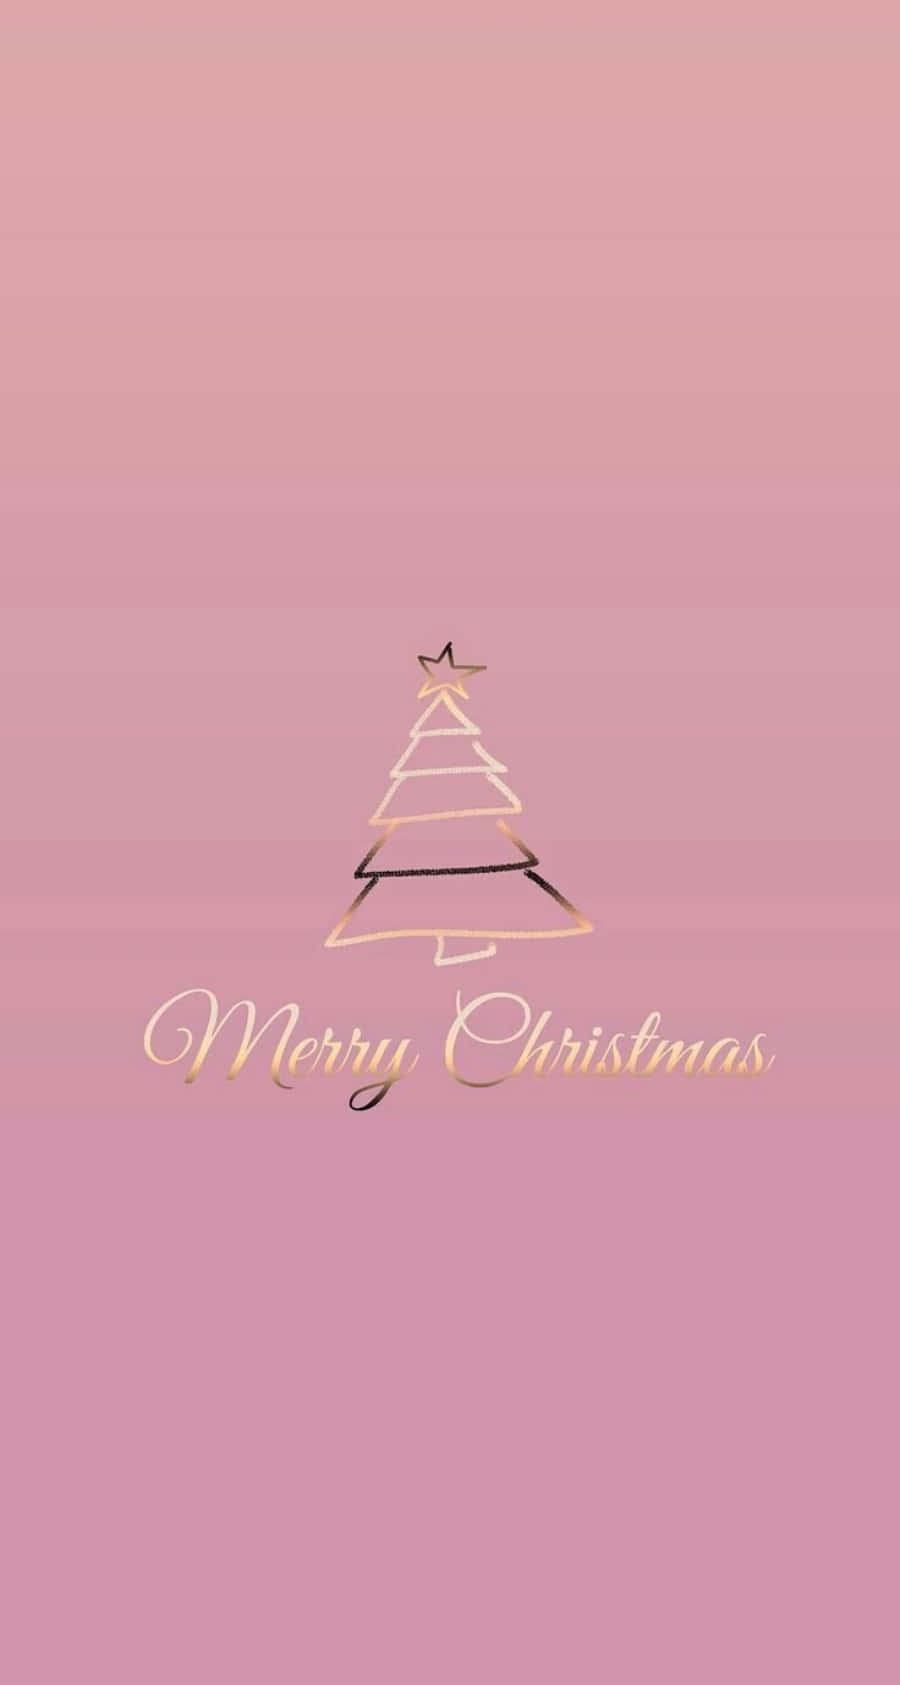 Cute Pink Christmas Greeting In Gold Font Wallpaper